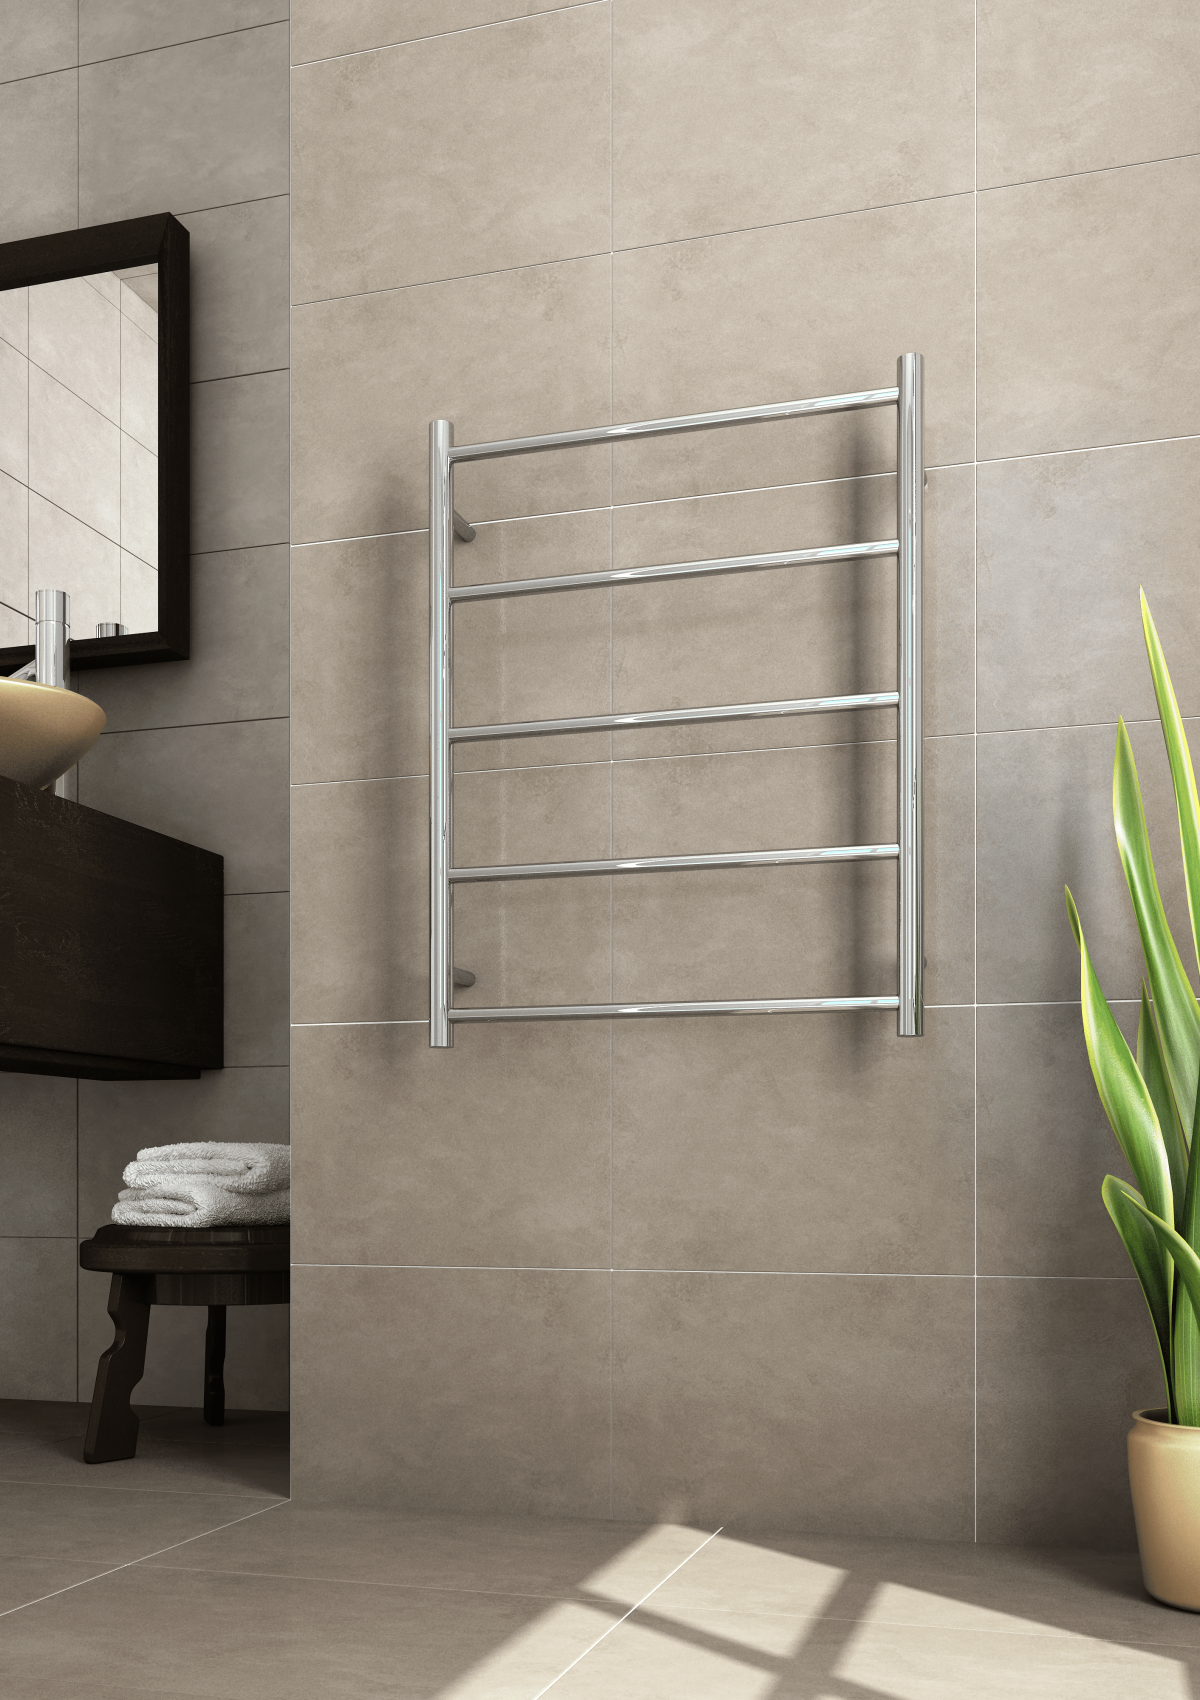 THERMOGROUP USR54 STRAIGHT ROUND LADDER NON-HEATED TOWEL RAIL POLISHED STAINLESS STEEL